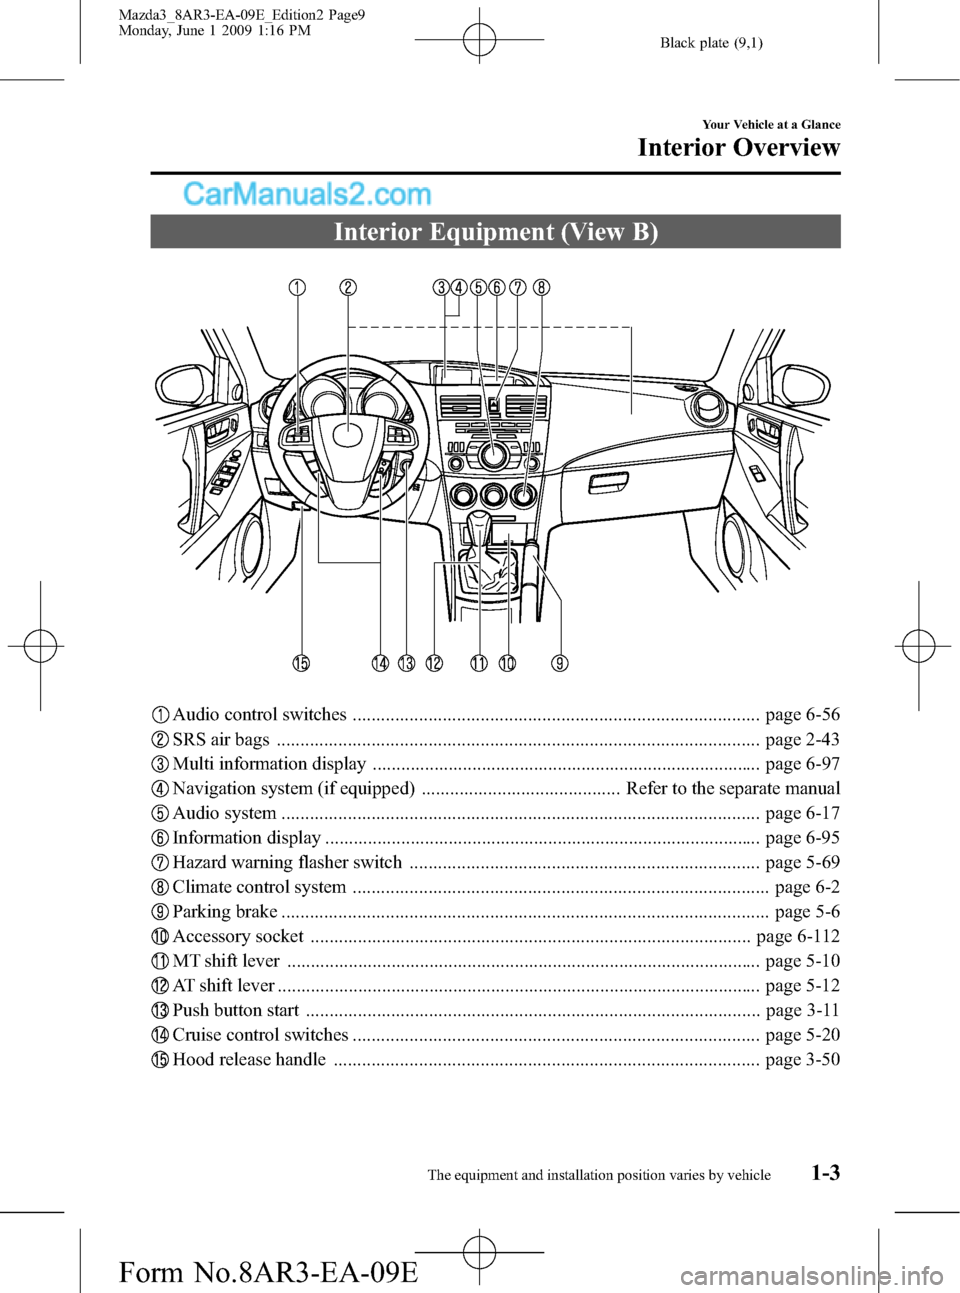 MAZDA MODEL MAZDASPEED 3 2010  Owners Manual (in English) Black plate (9,1)
Interior Equipment (View B)
Audio control switches ...................................................................................... page 6-56
SRS air bags .....................